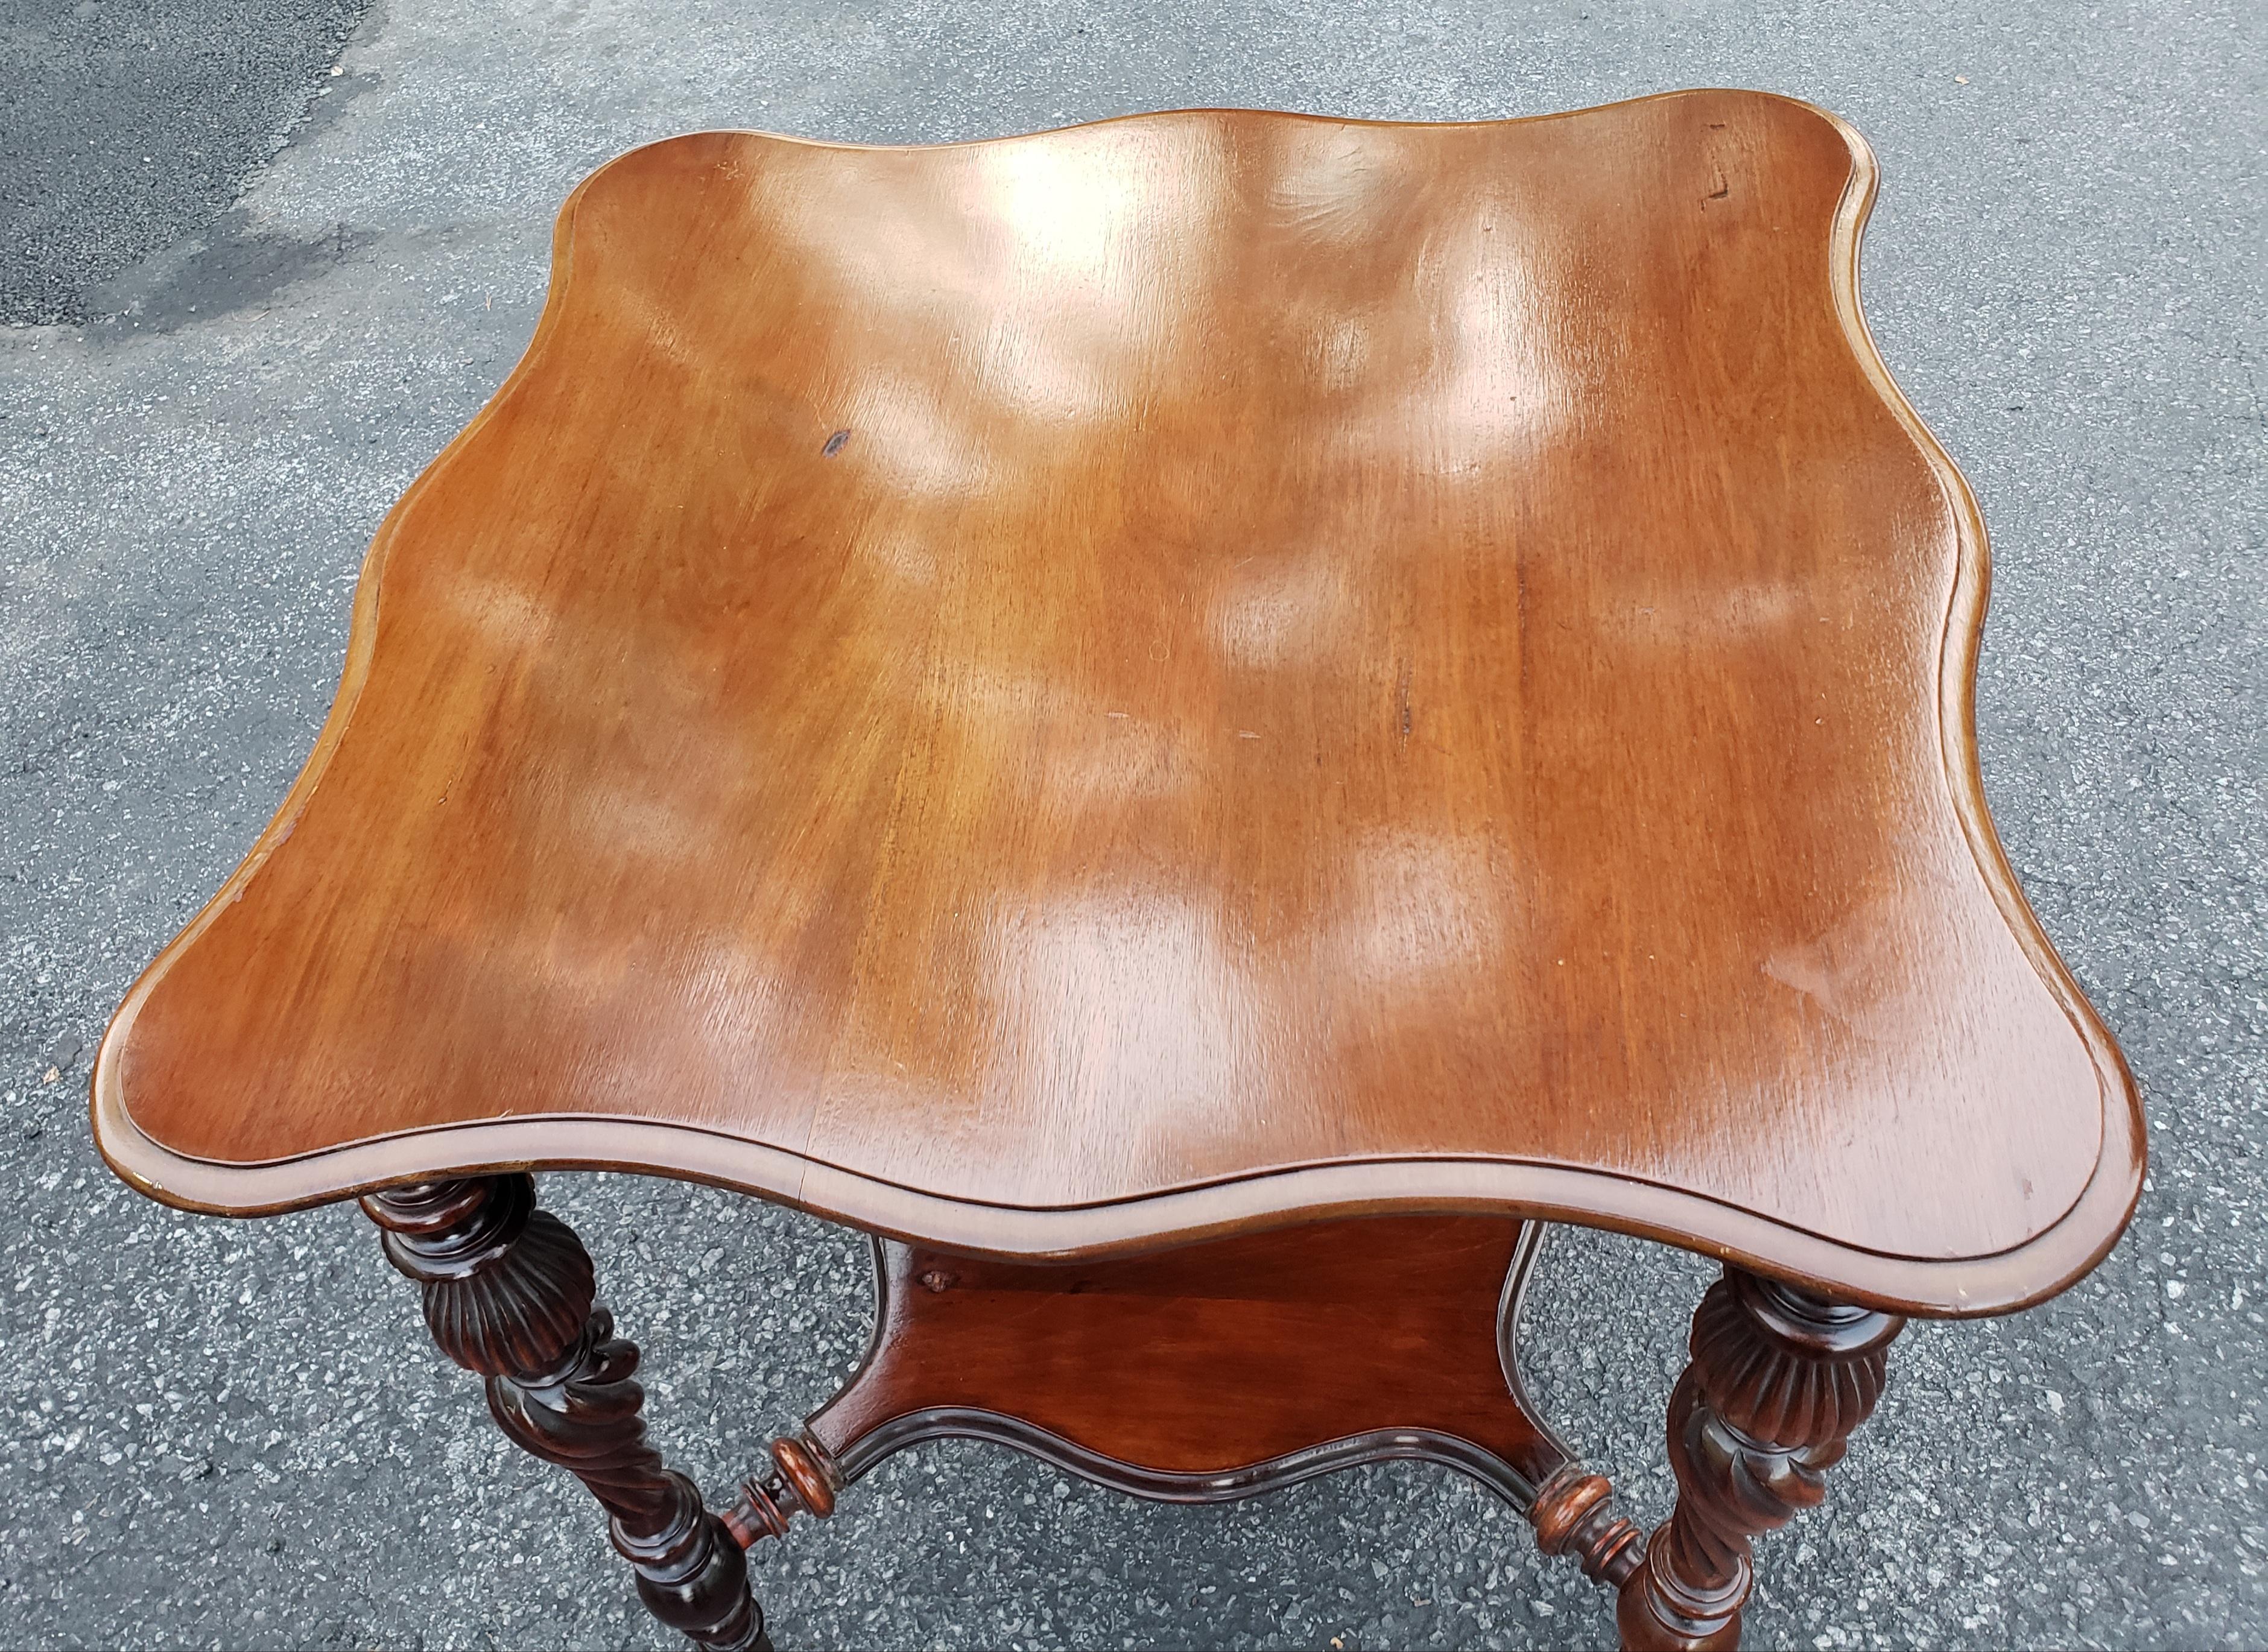 Carved 1930s Regency Style Mahogany Tiered Tea Table with Ball Claw Feet For Sale